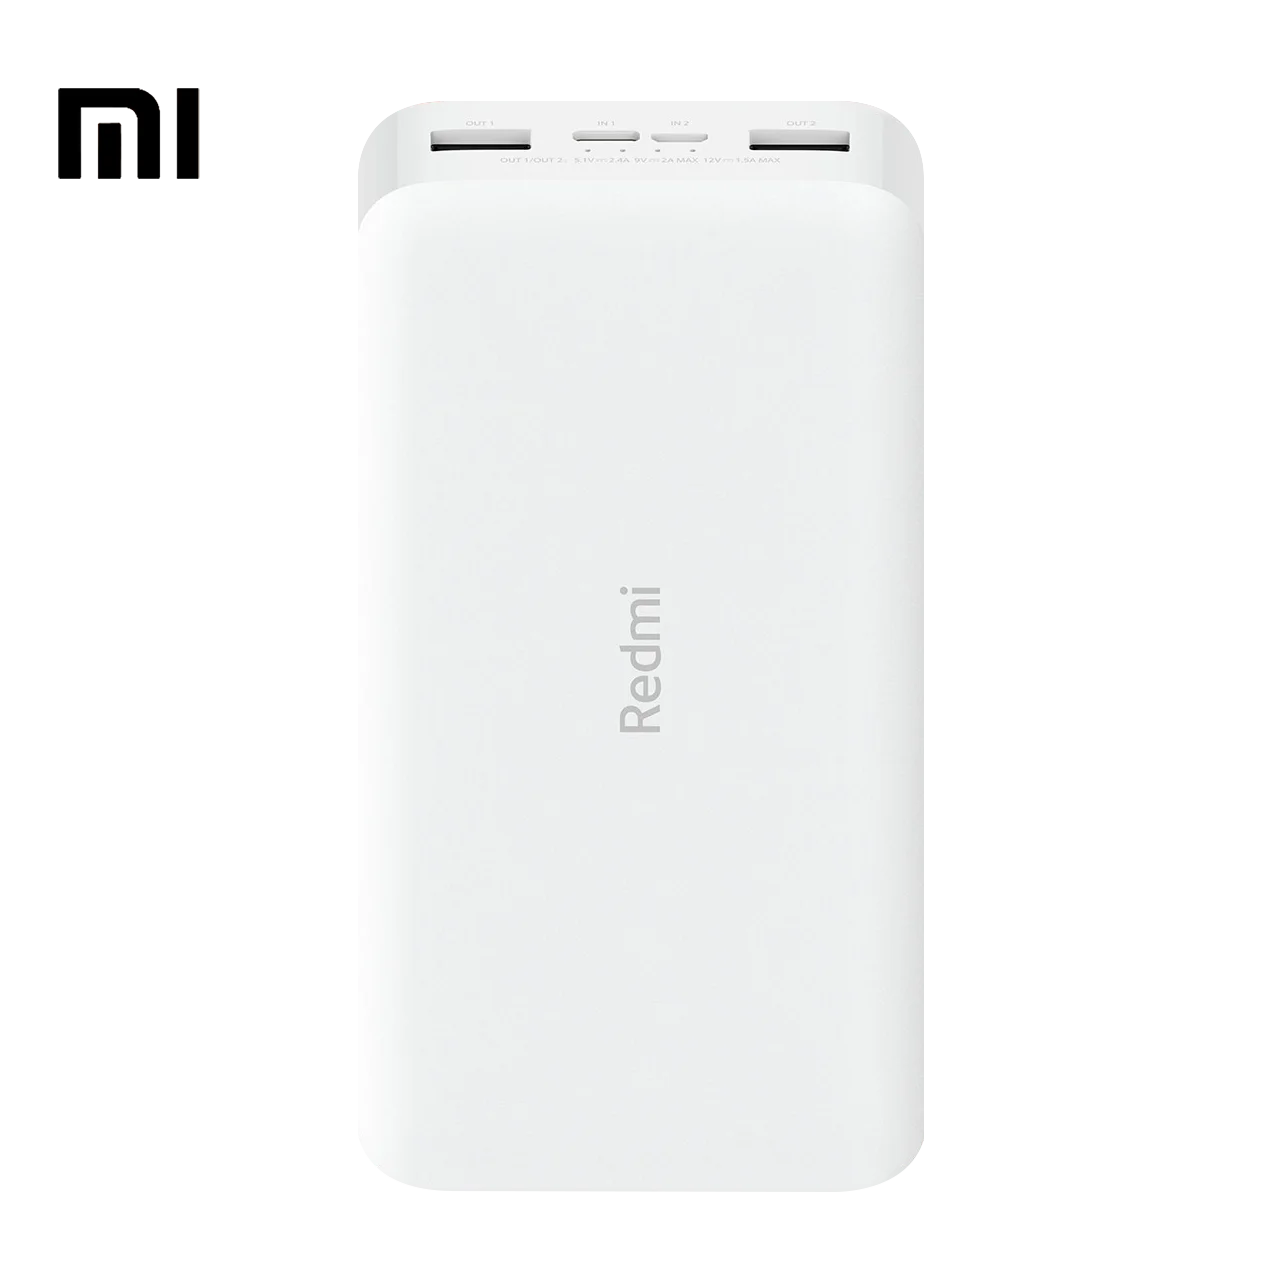 Xiaomi Redmi Power Bank 20000mAh 18W Quick Charge Power bank Fast Charging Portable Charger PB200LZM